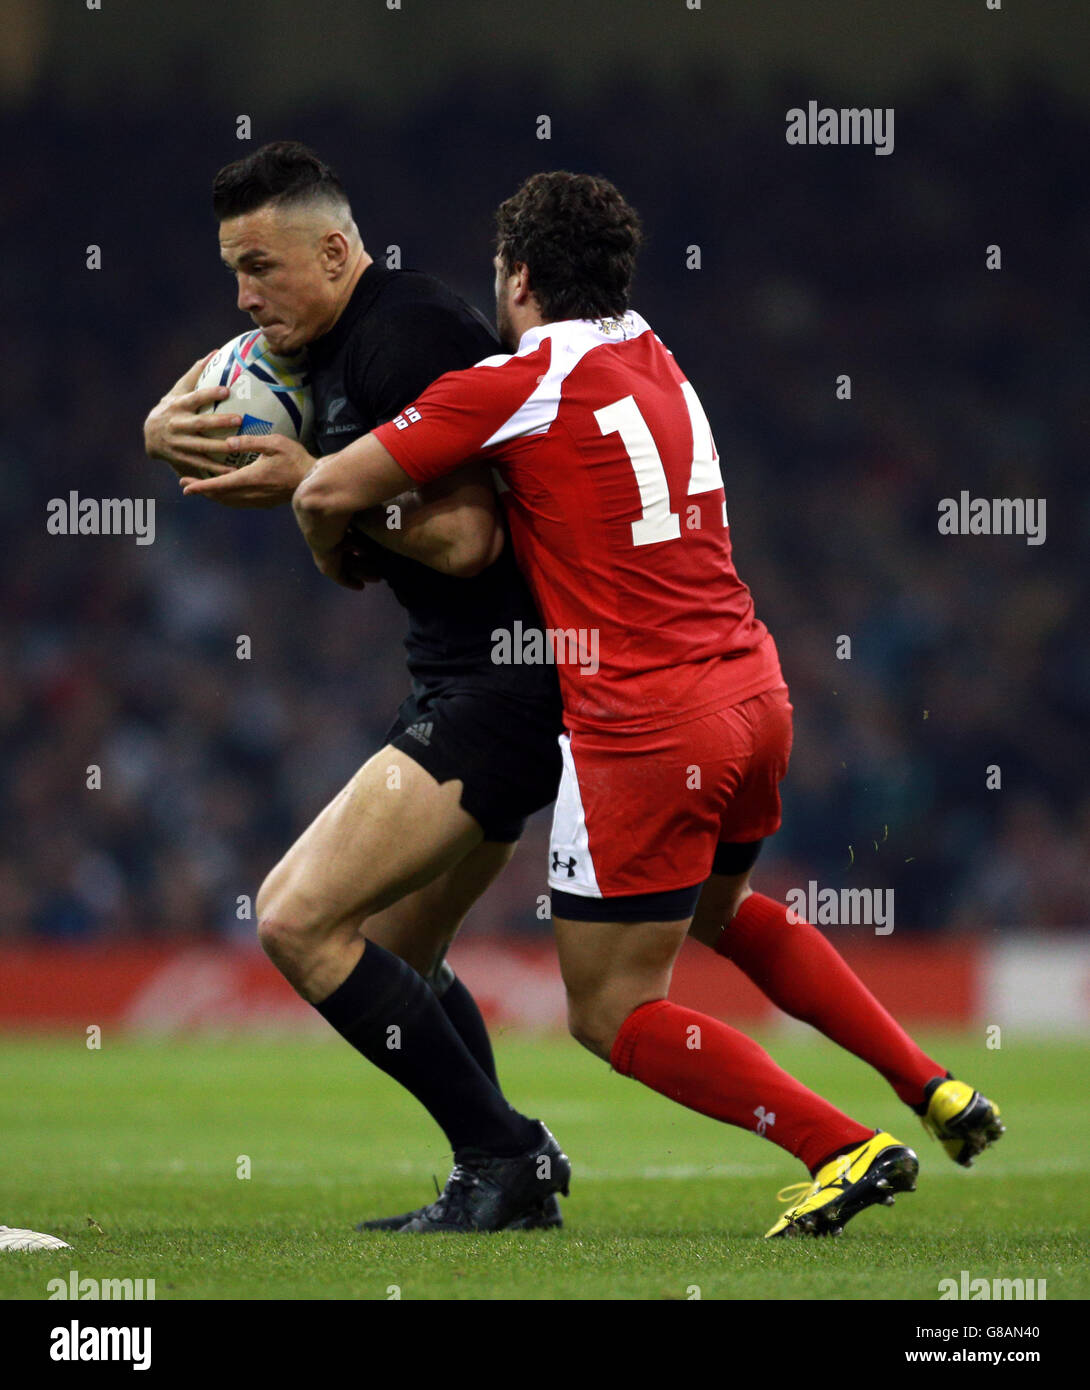 Rugby Union - Rugby World Cup 2015 - Pool C - New Zealand v Georgia - Millennium Stadium Stock Photo